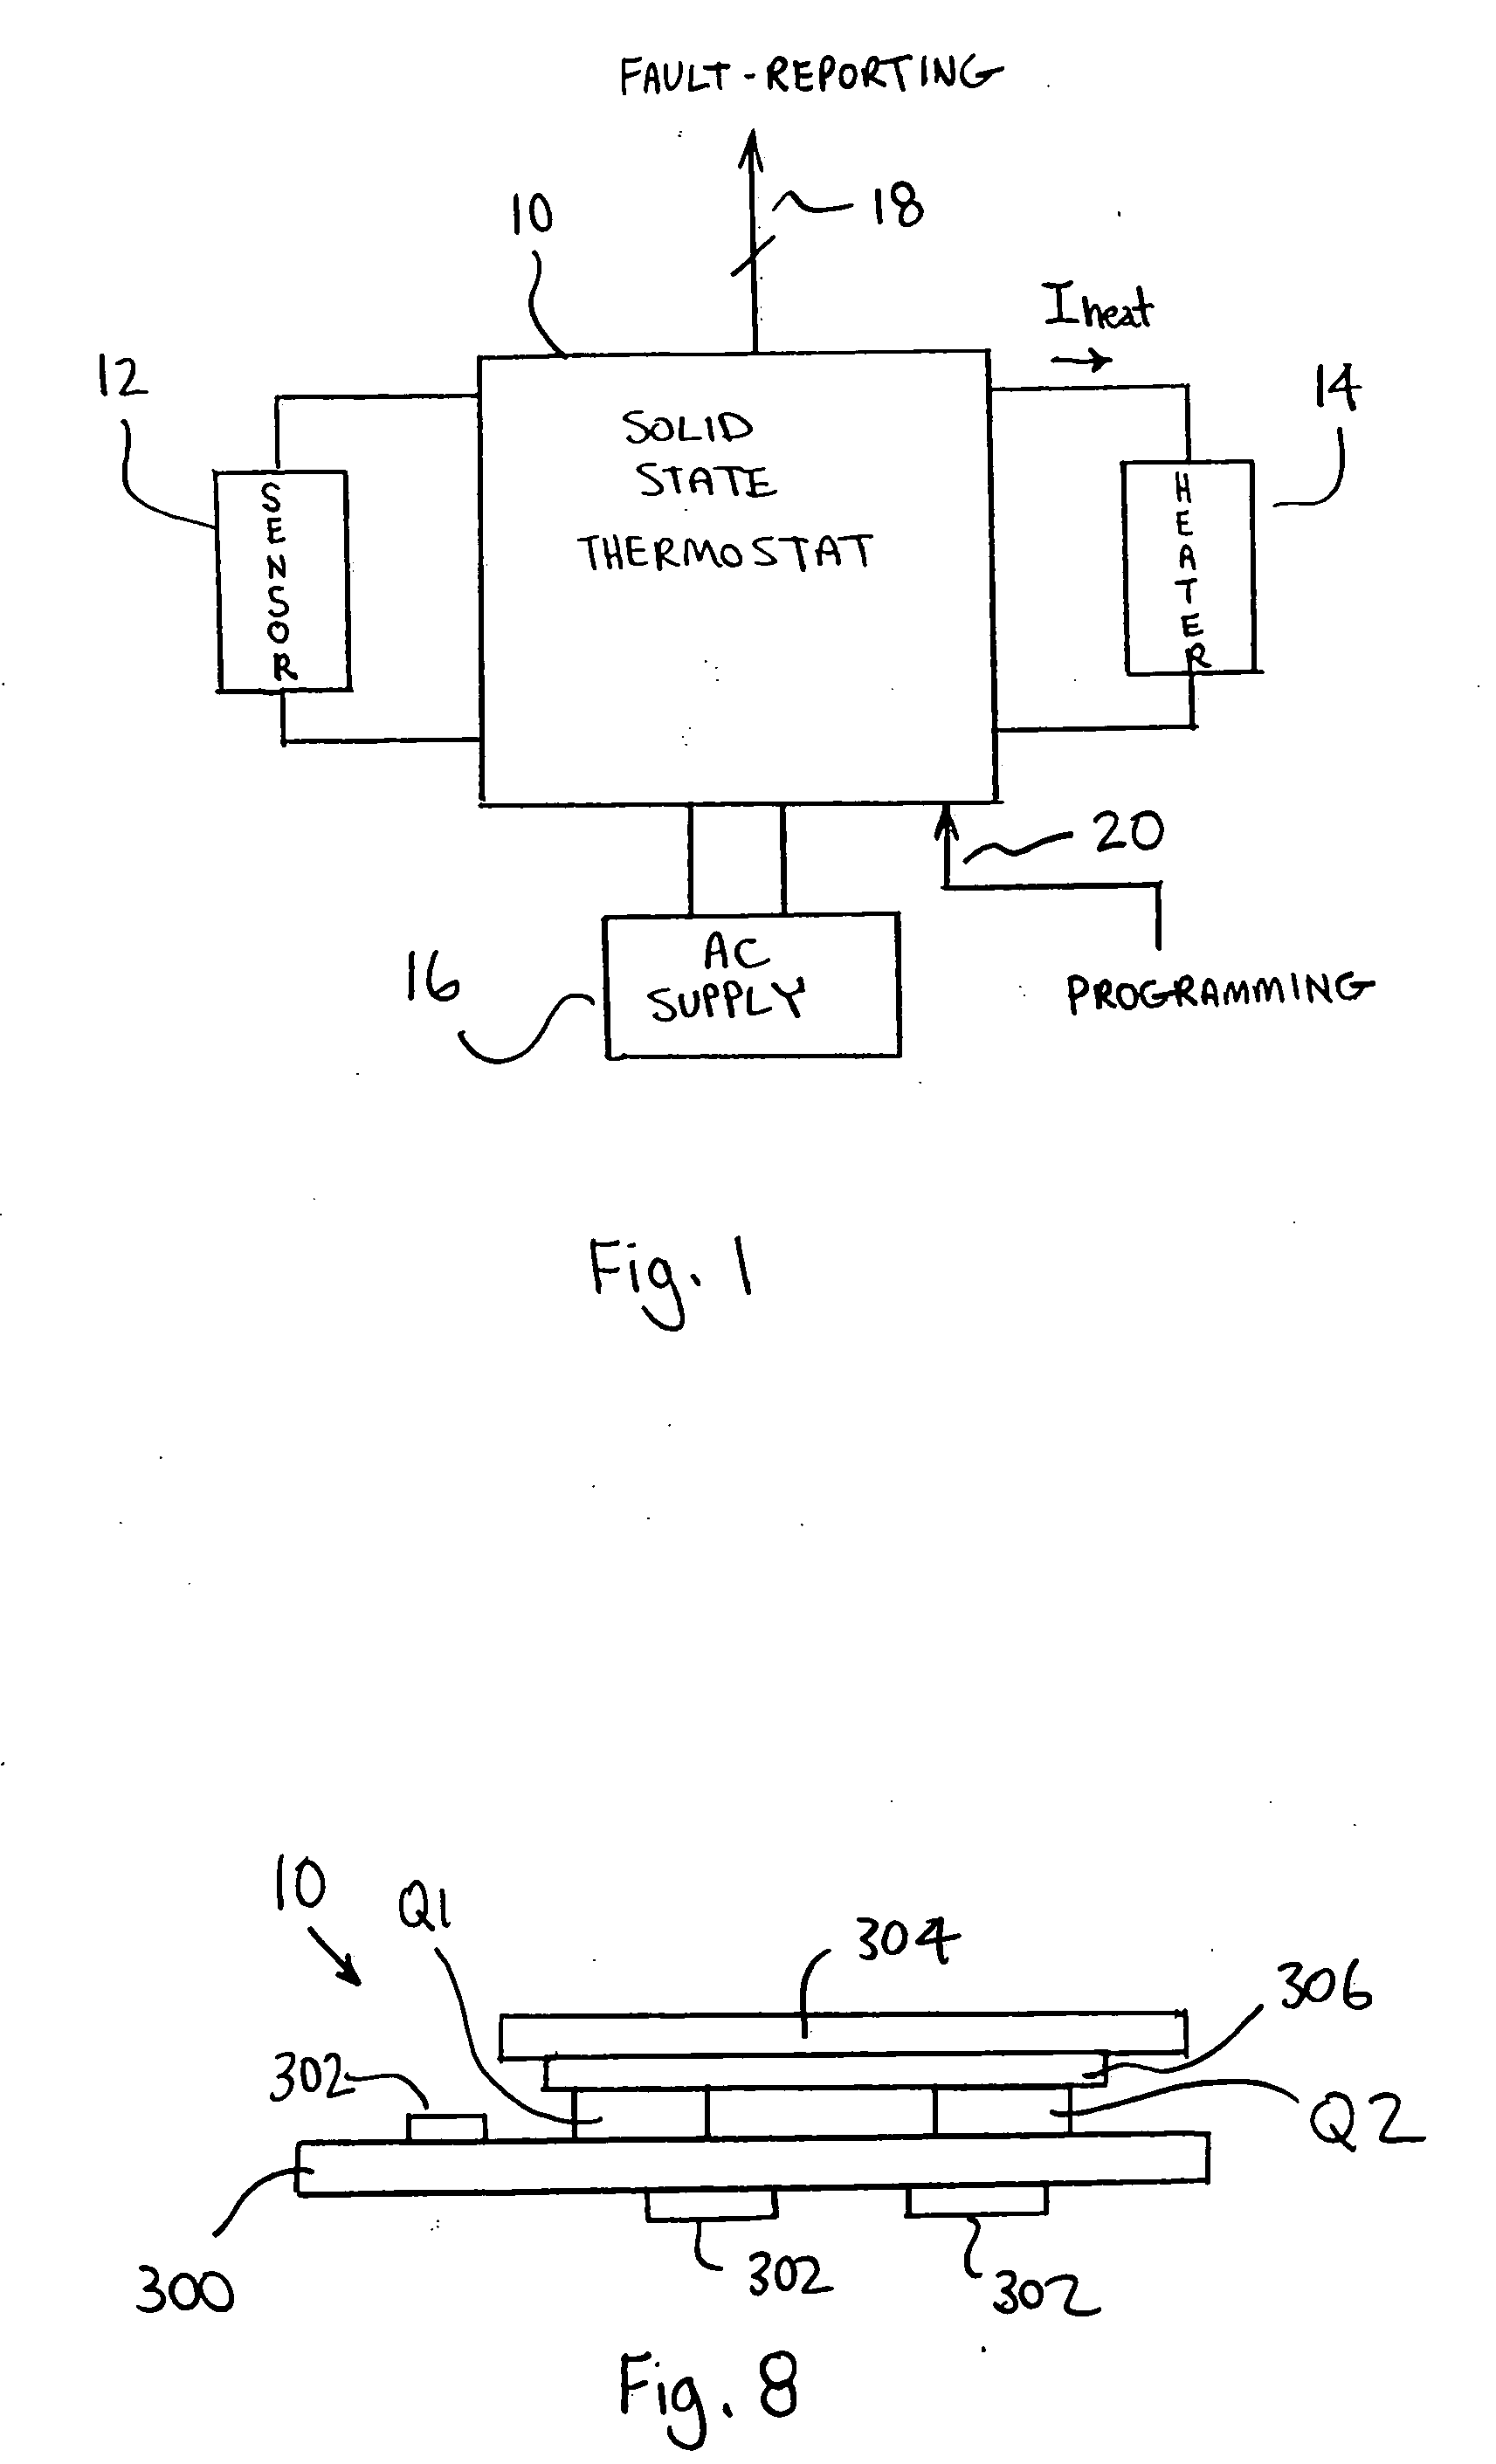 Low noise solid-state thermostat with microprocessor controlled fault detection and reporting, and programmable set points